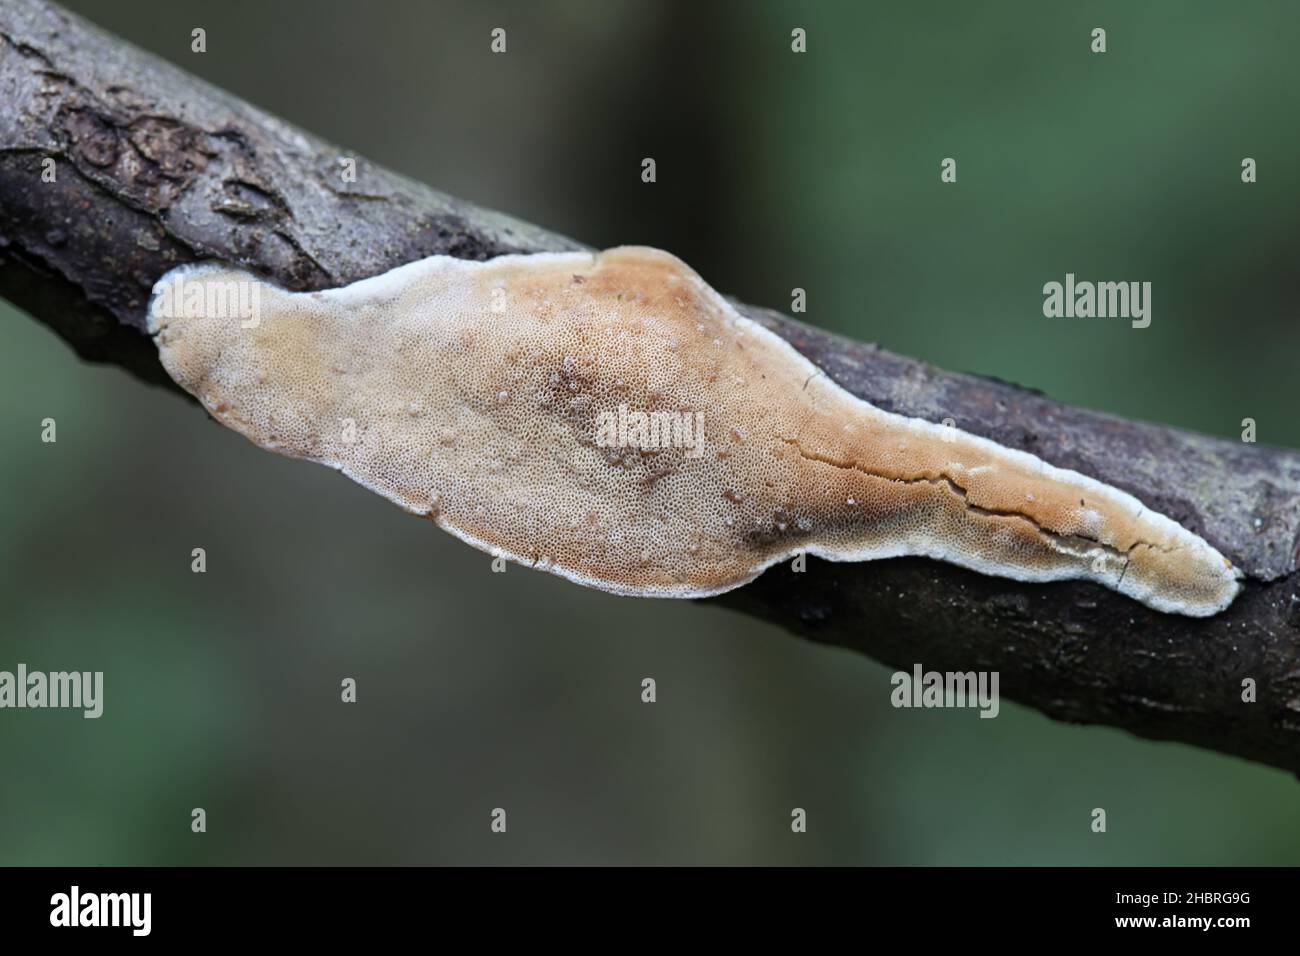 Dichomitus campestris, also called Polyporus campestris, commonly known as Hazel porecrust, wild polypore fungus from Finland Stock Photo